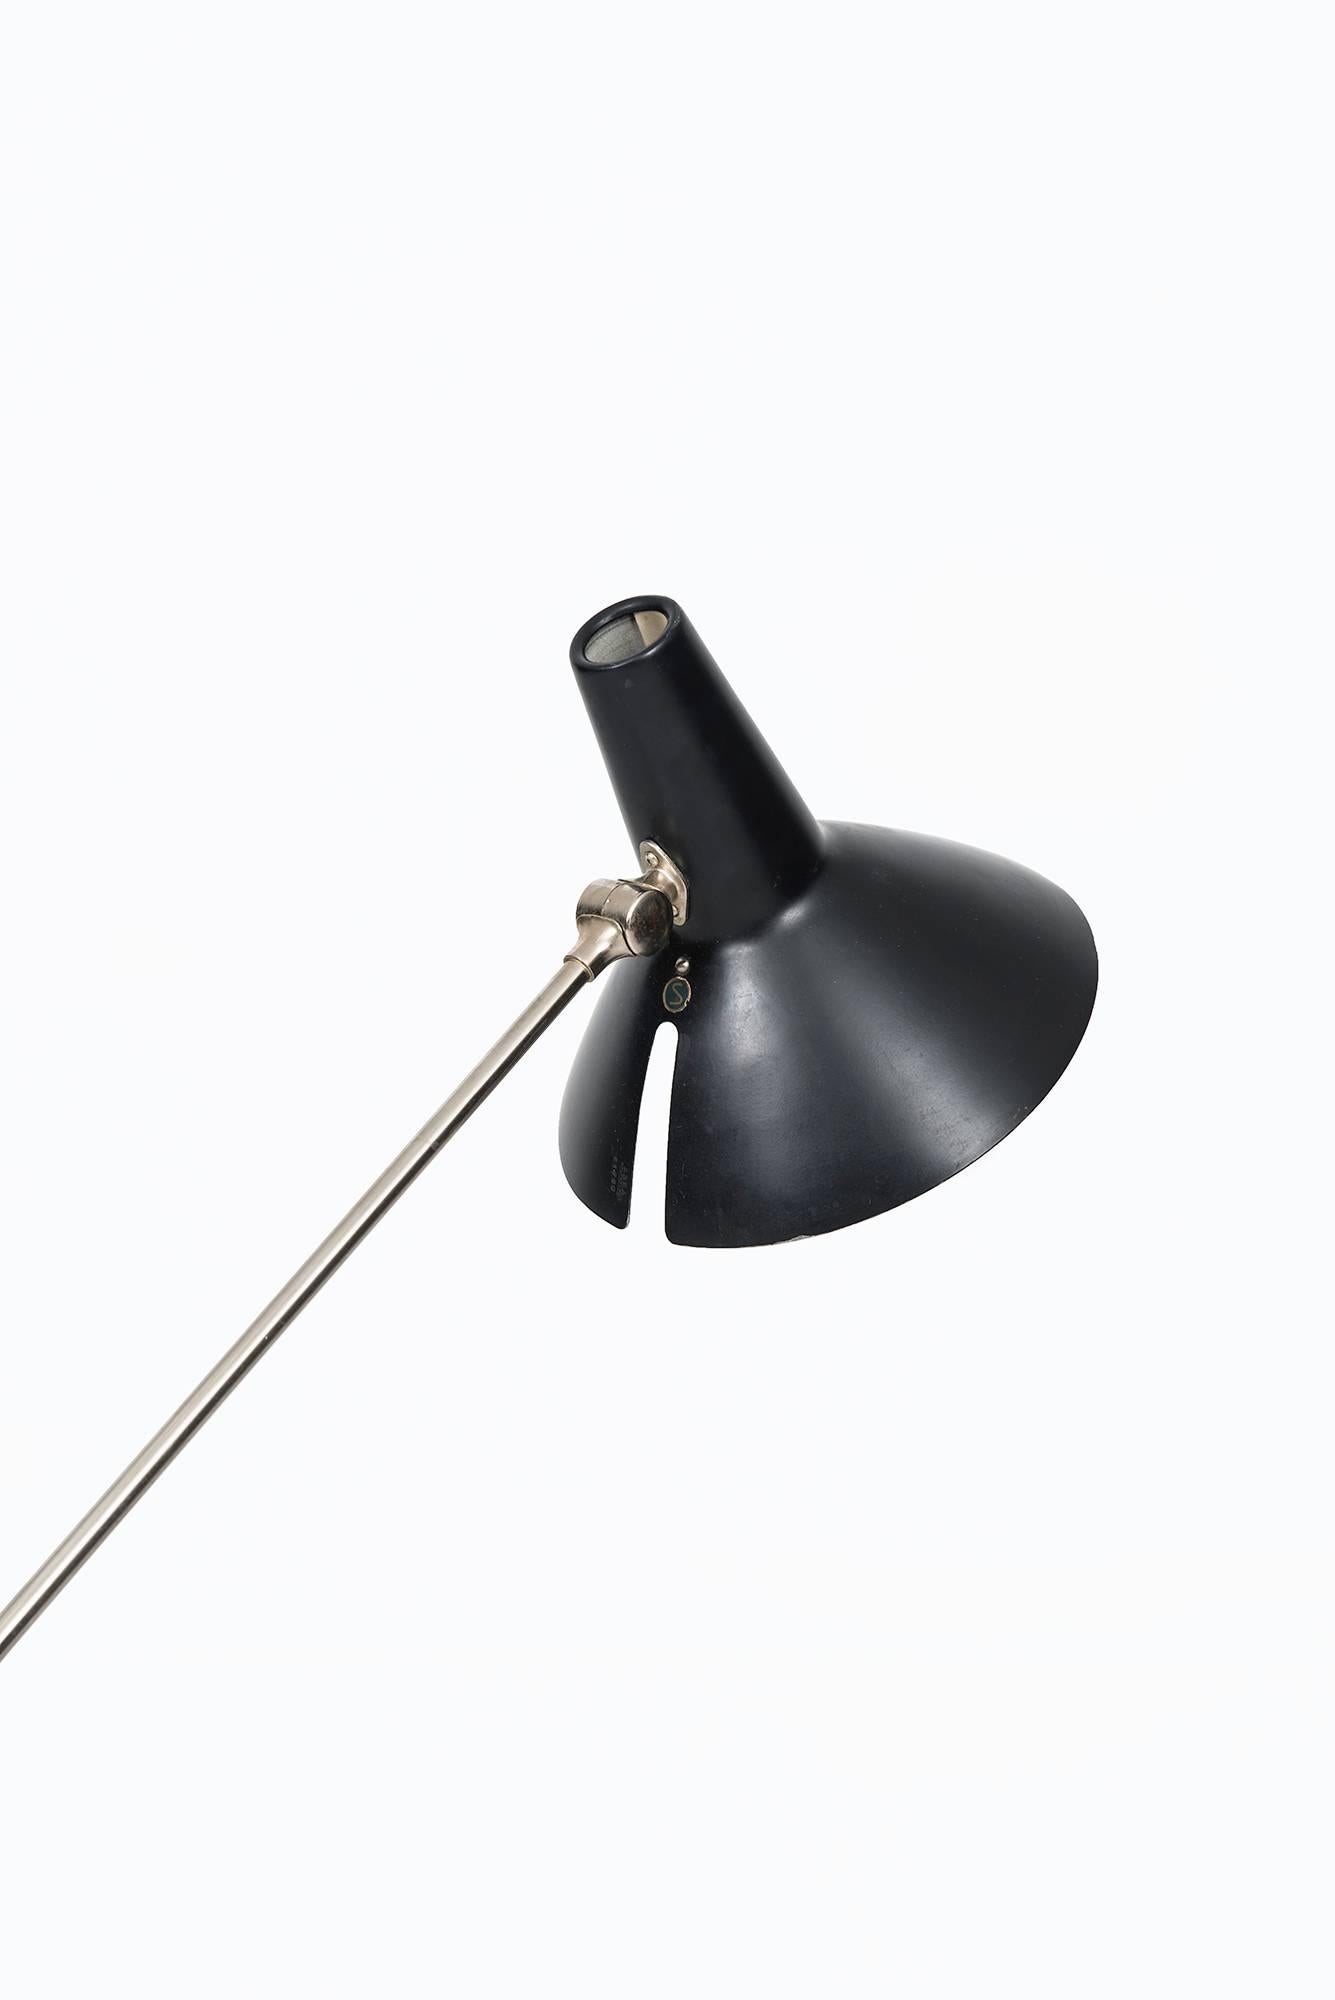 Rare adjustable floor lamp produced by ASEA in Sweden.